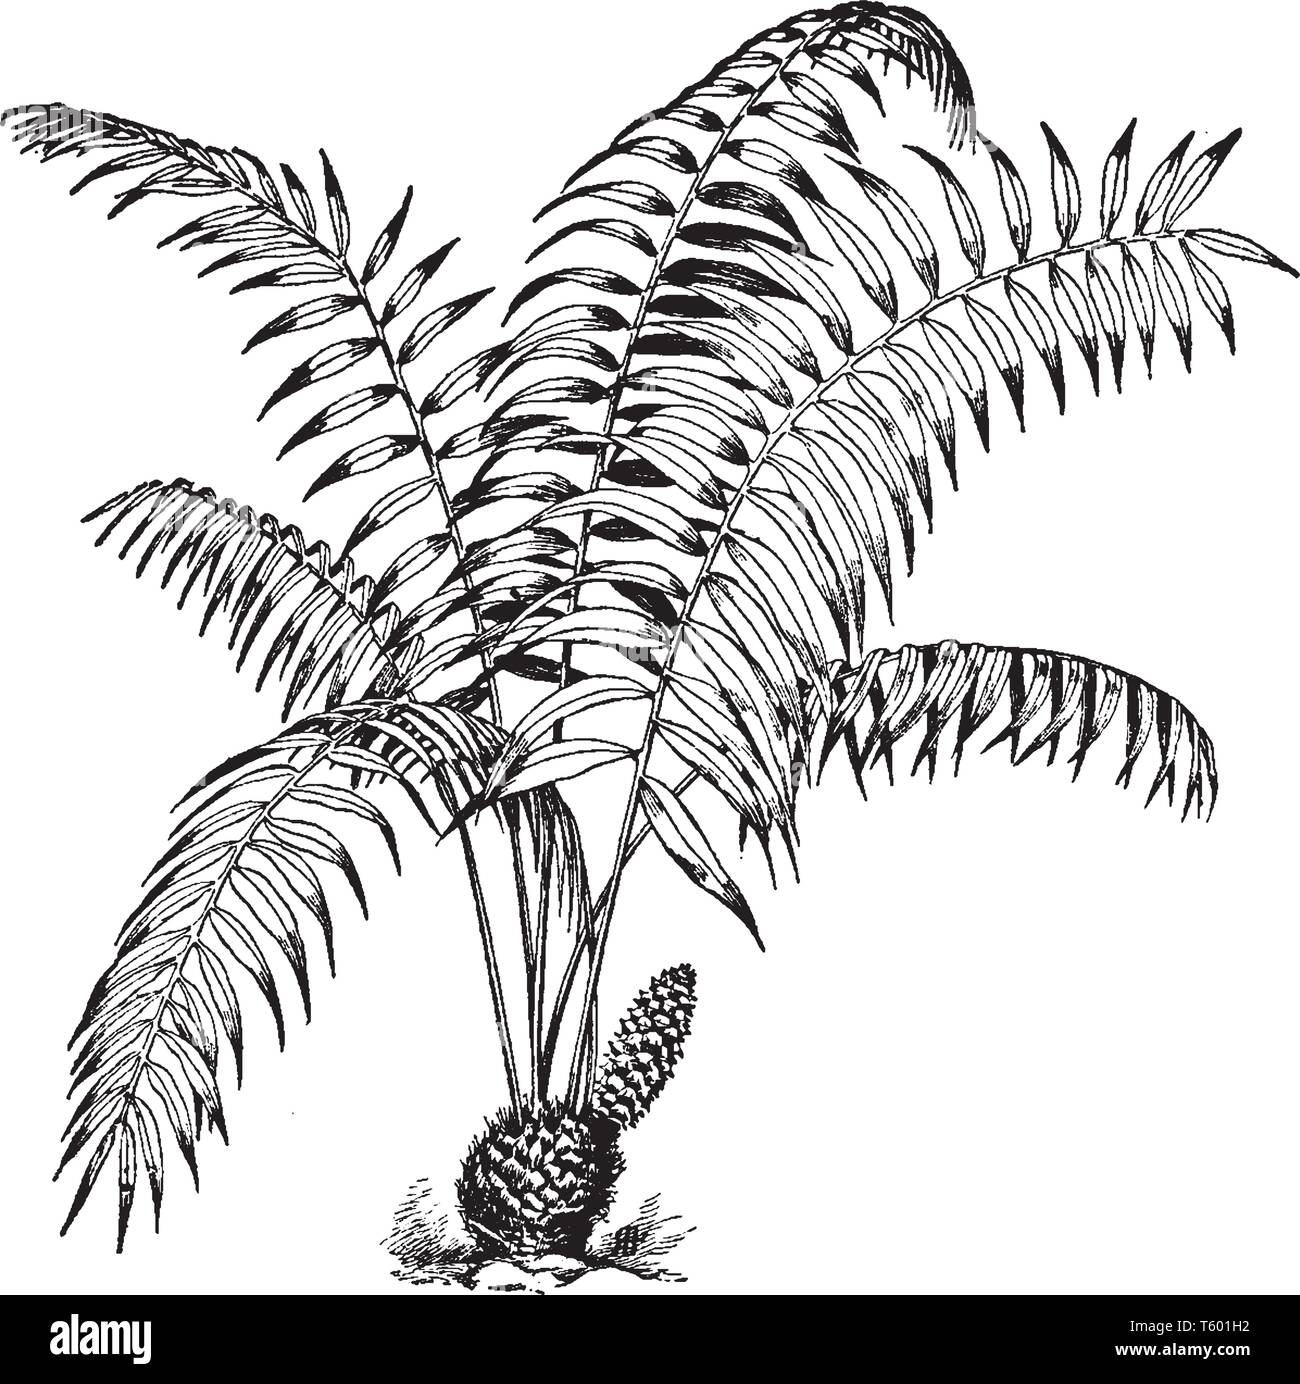 Ceratozamia Mexicana is known as Mexican Horncone. It is an evergreen plant, vintage line drawing or engraving illustration. Stock Vector